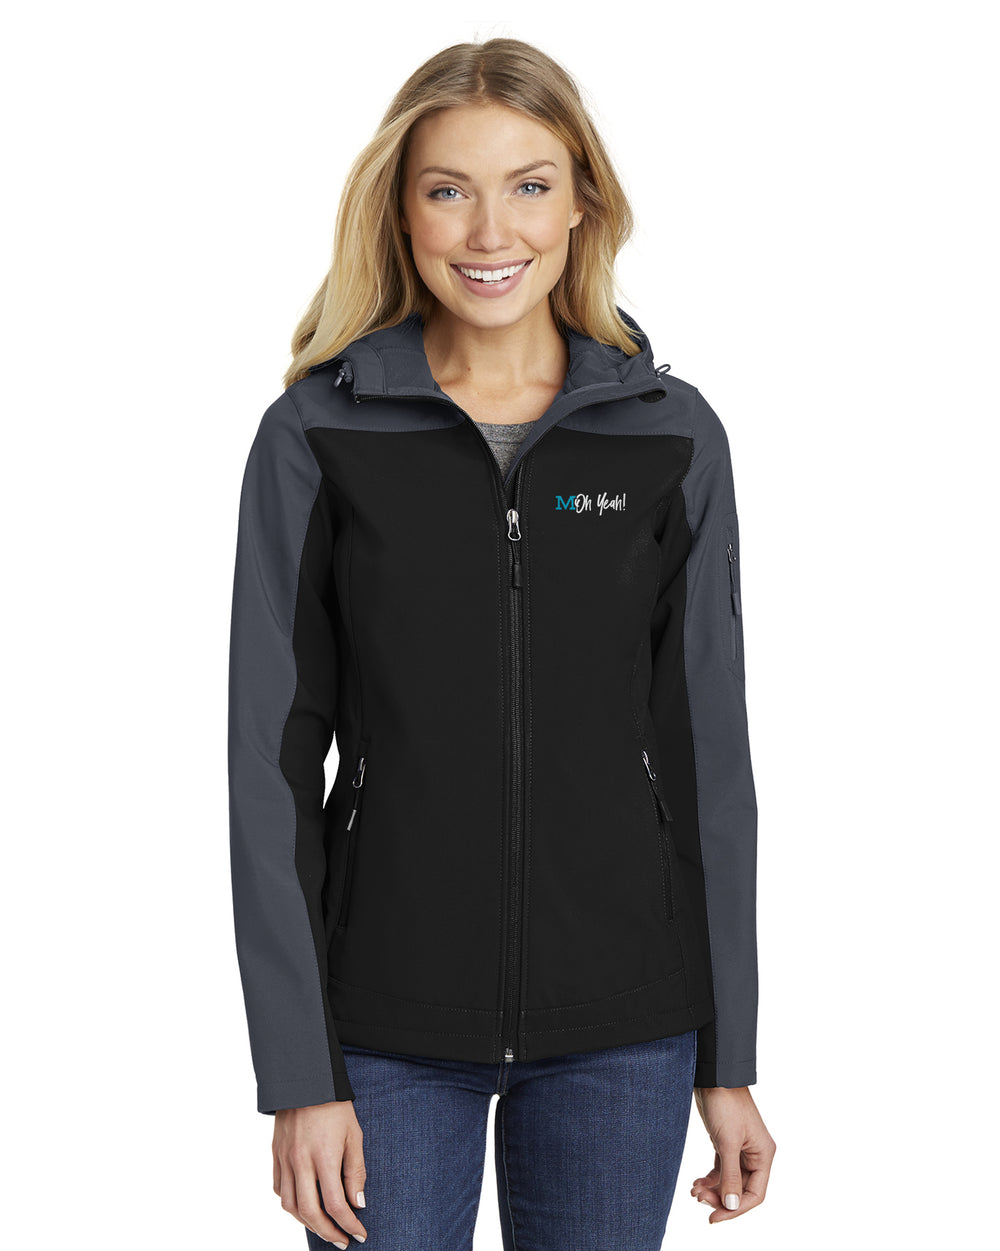 MOh Yeah - Port Authority Ladies Hooded Core Soft Shell Jacket - L335